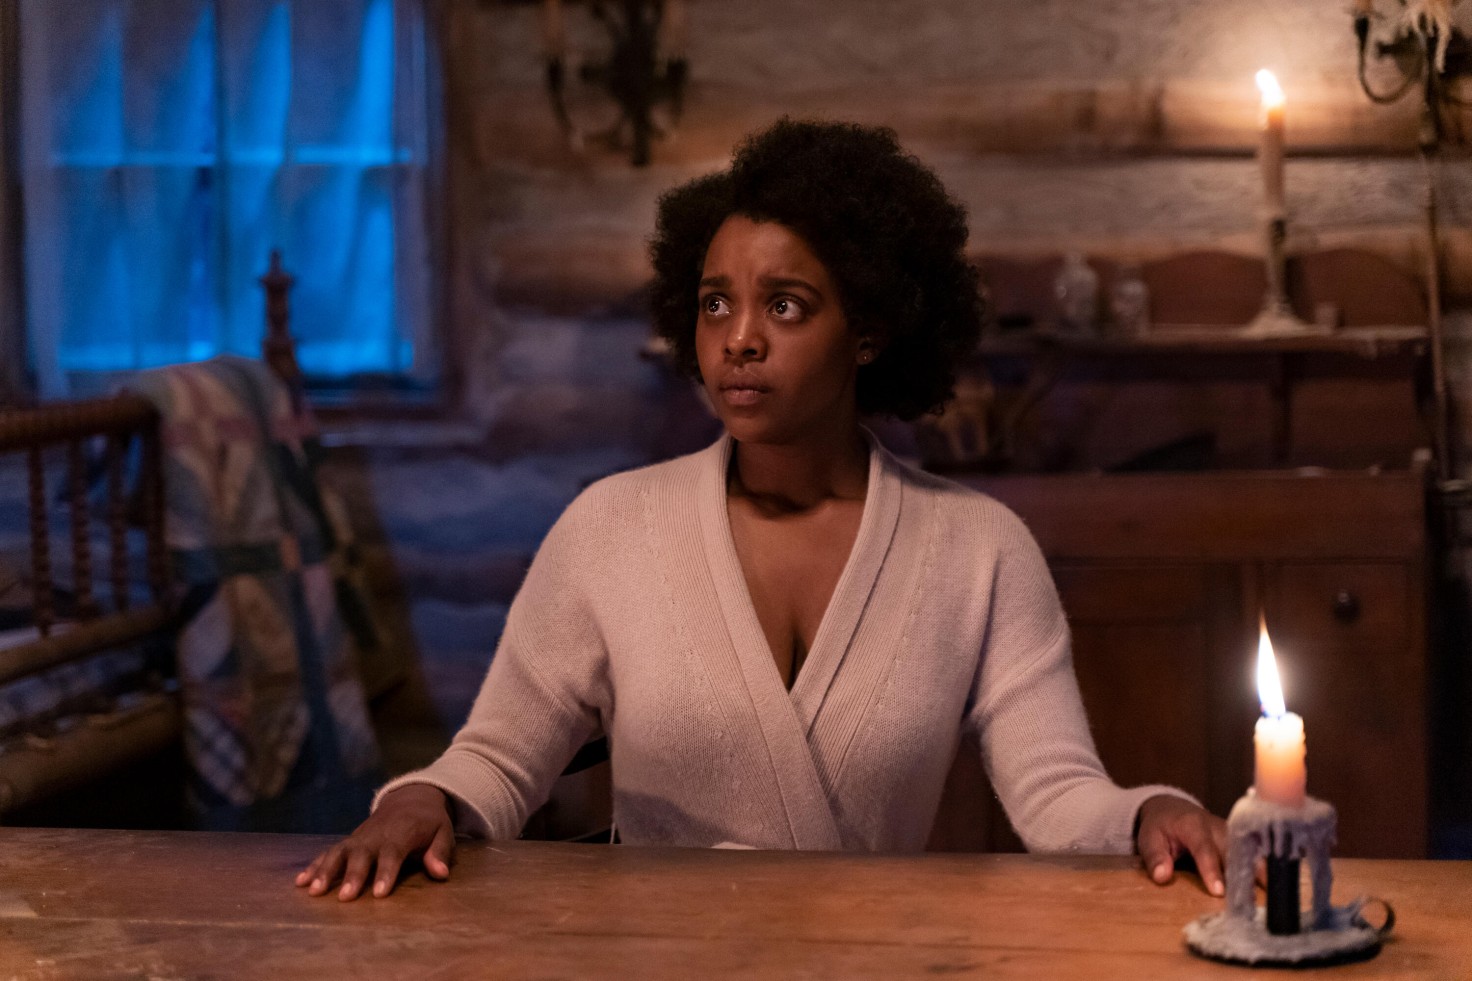 A still from Kindred shows the protagonist — a Black person dressed in modern clothing — sitting pensively at a table which appears to be from a time period in the past.